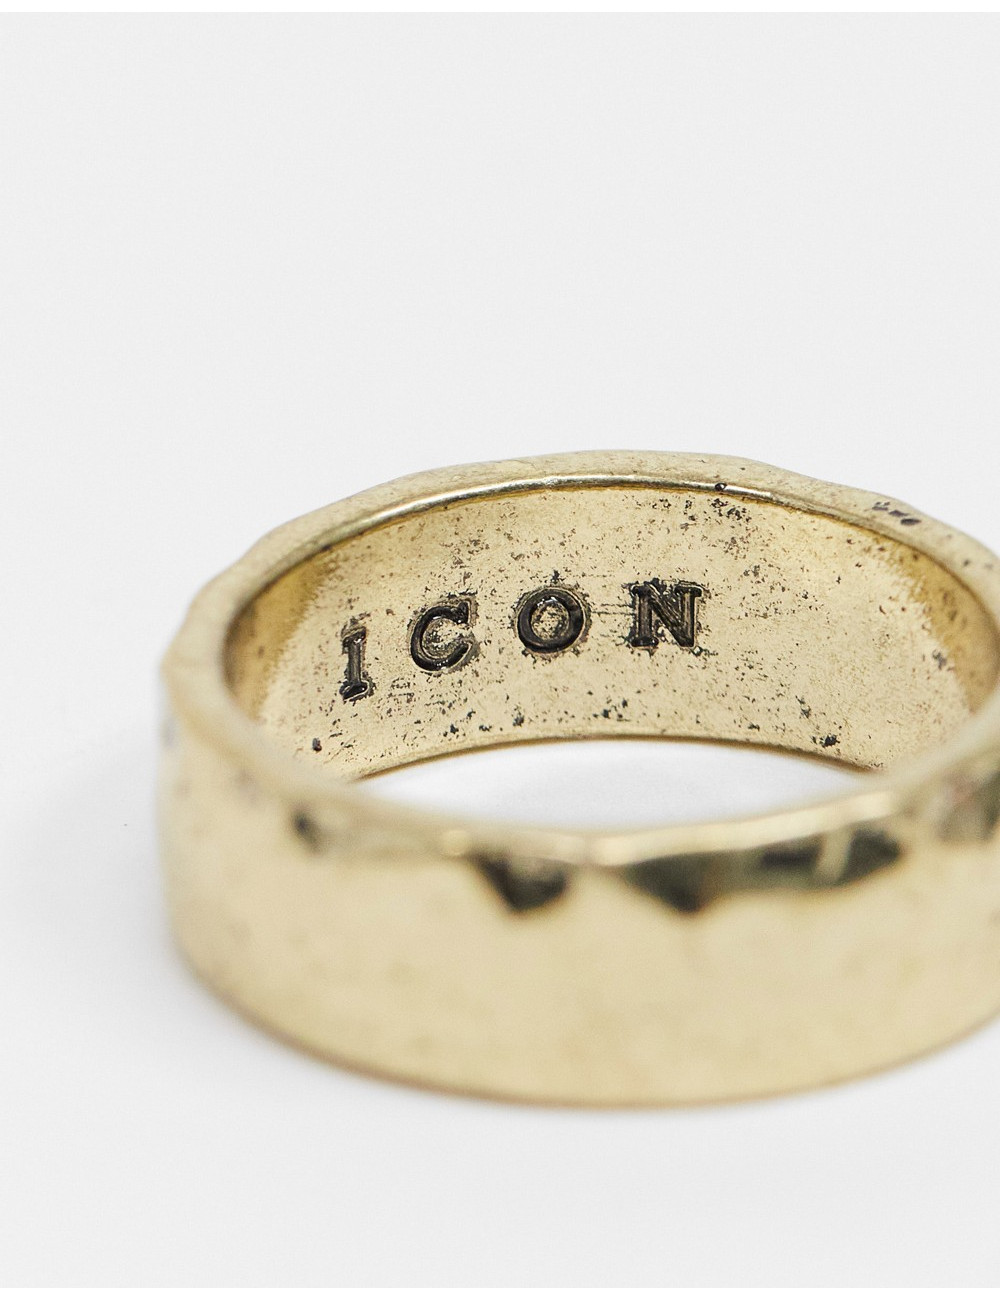 Icon Brand band ring in...